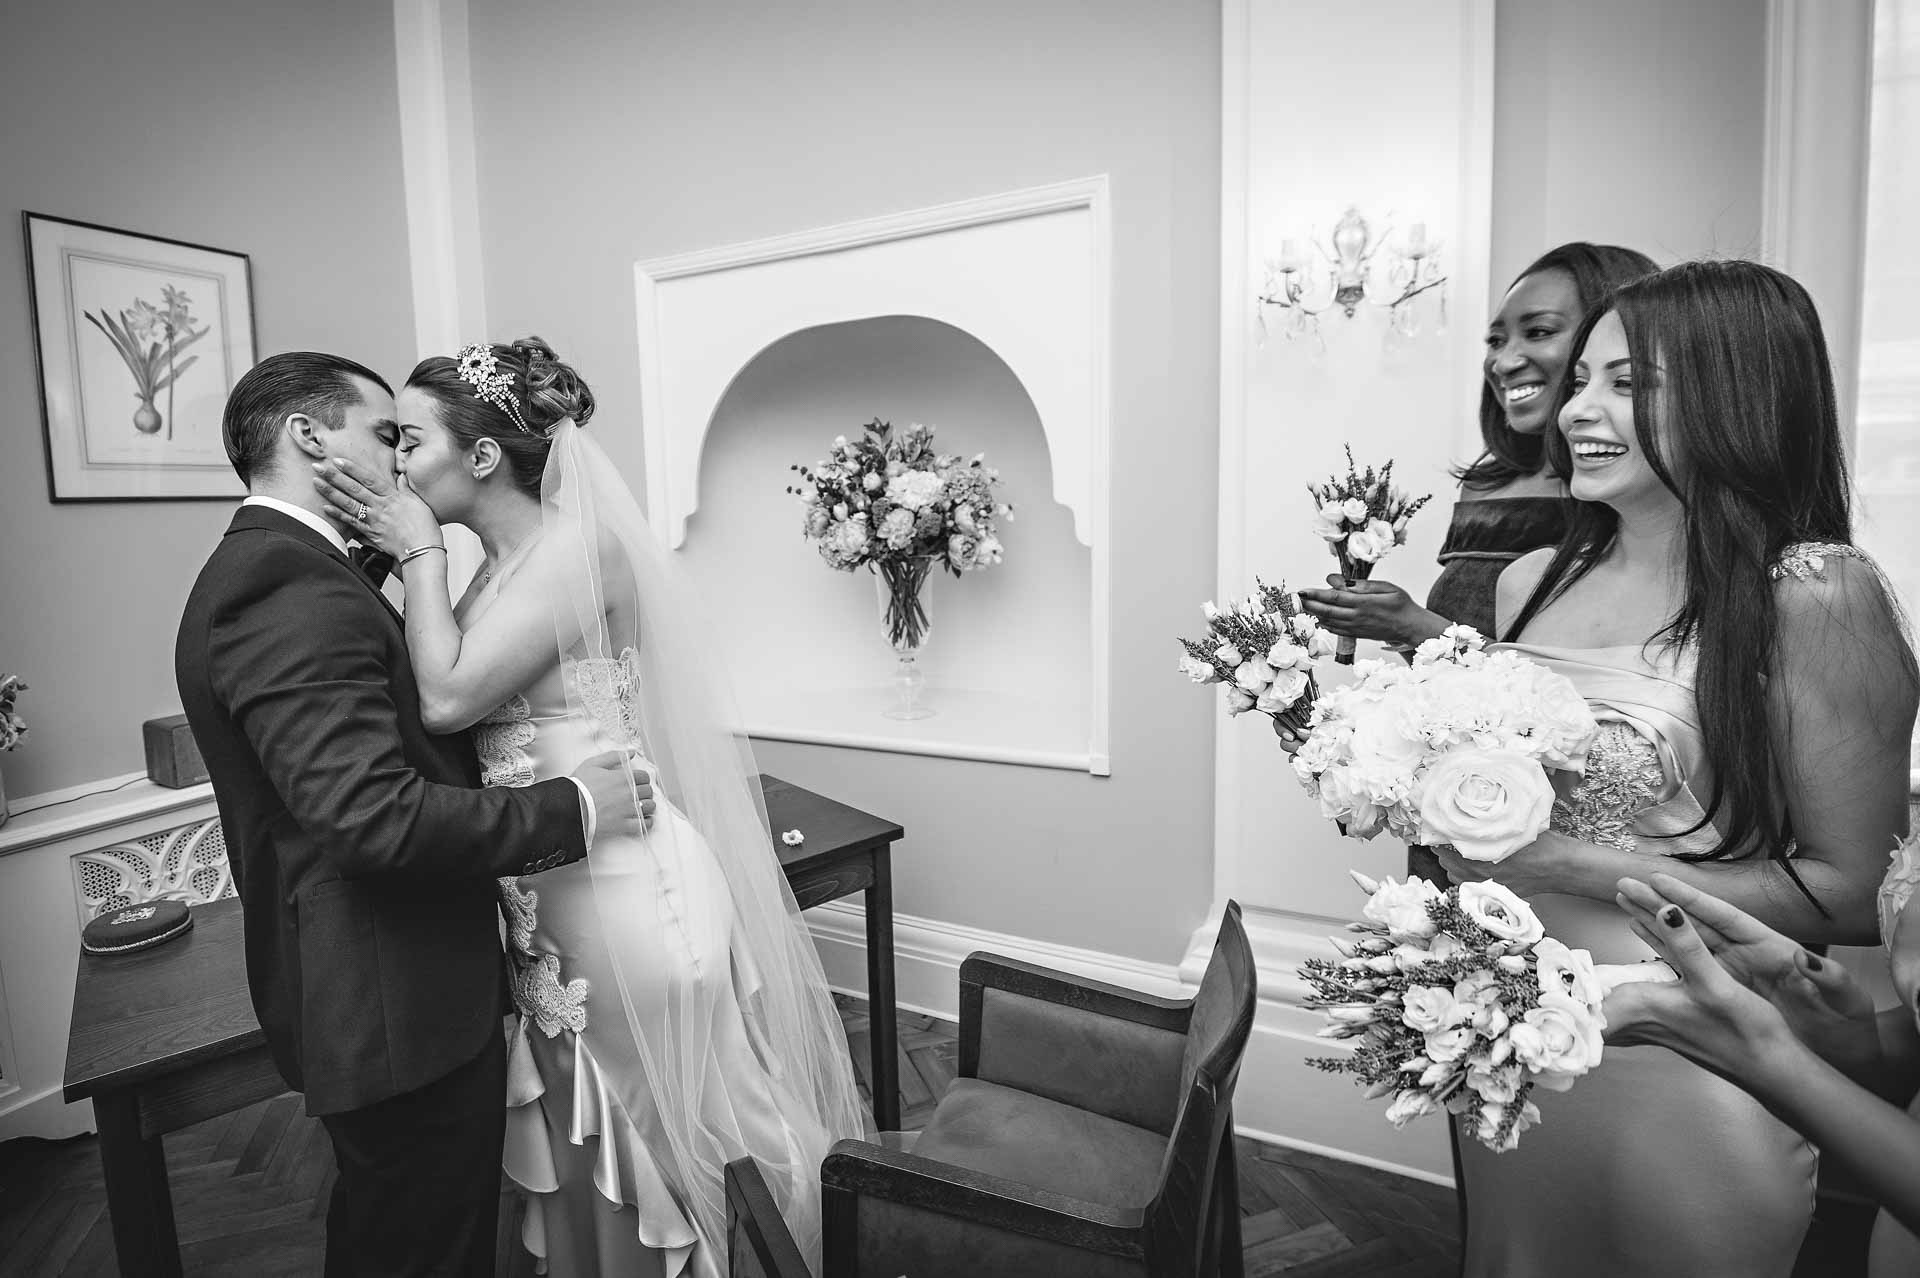 Bride and Groom kiss as guests look on at wedding in Rossetti Room, Chelsea